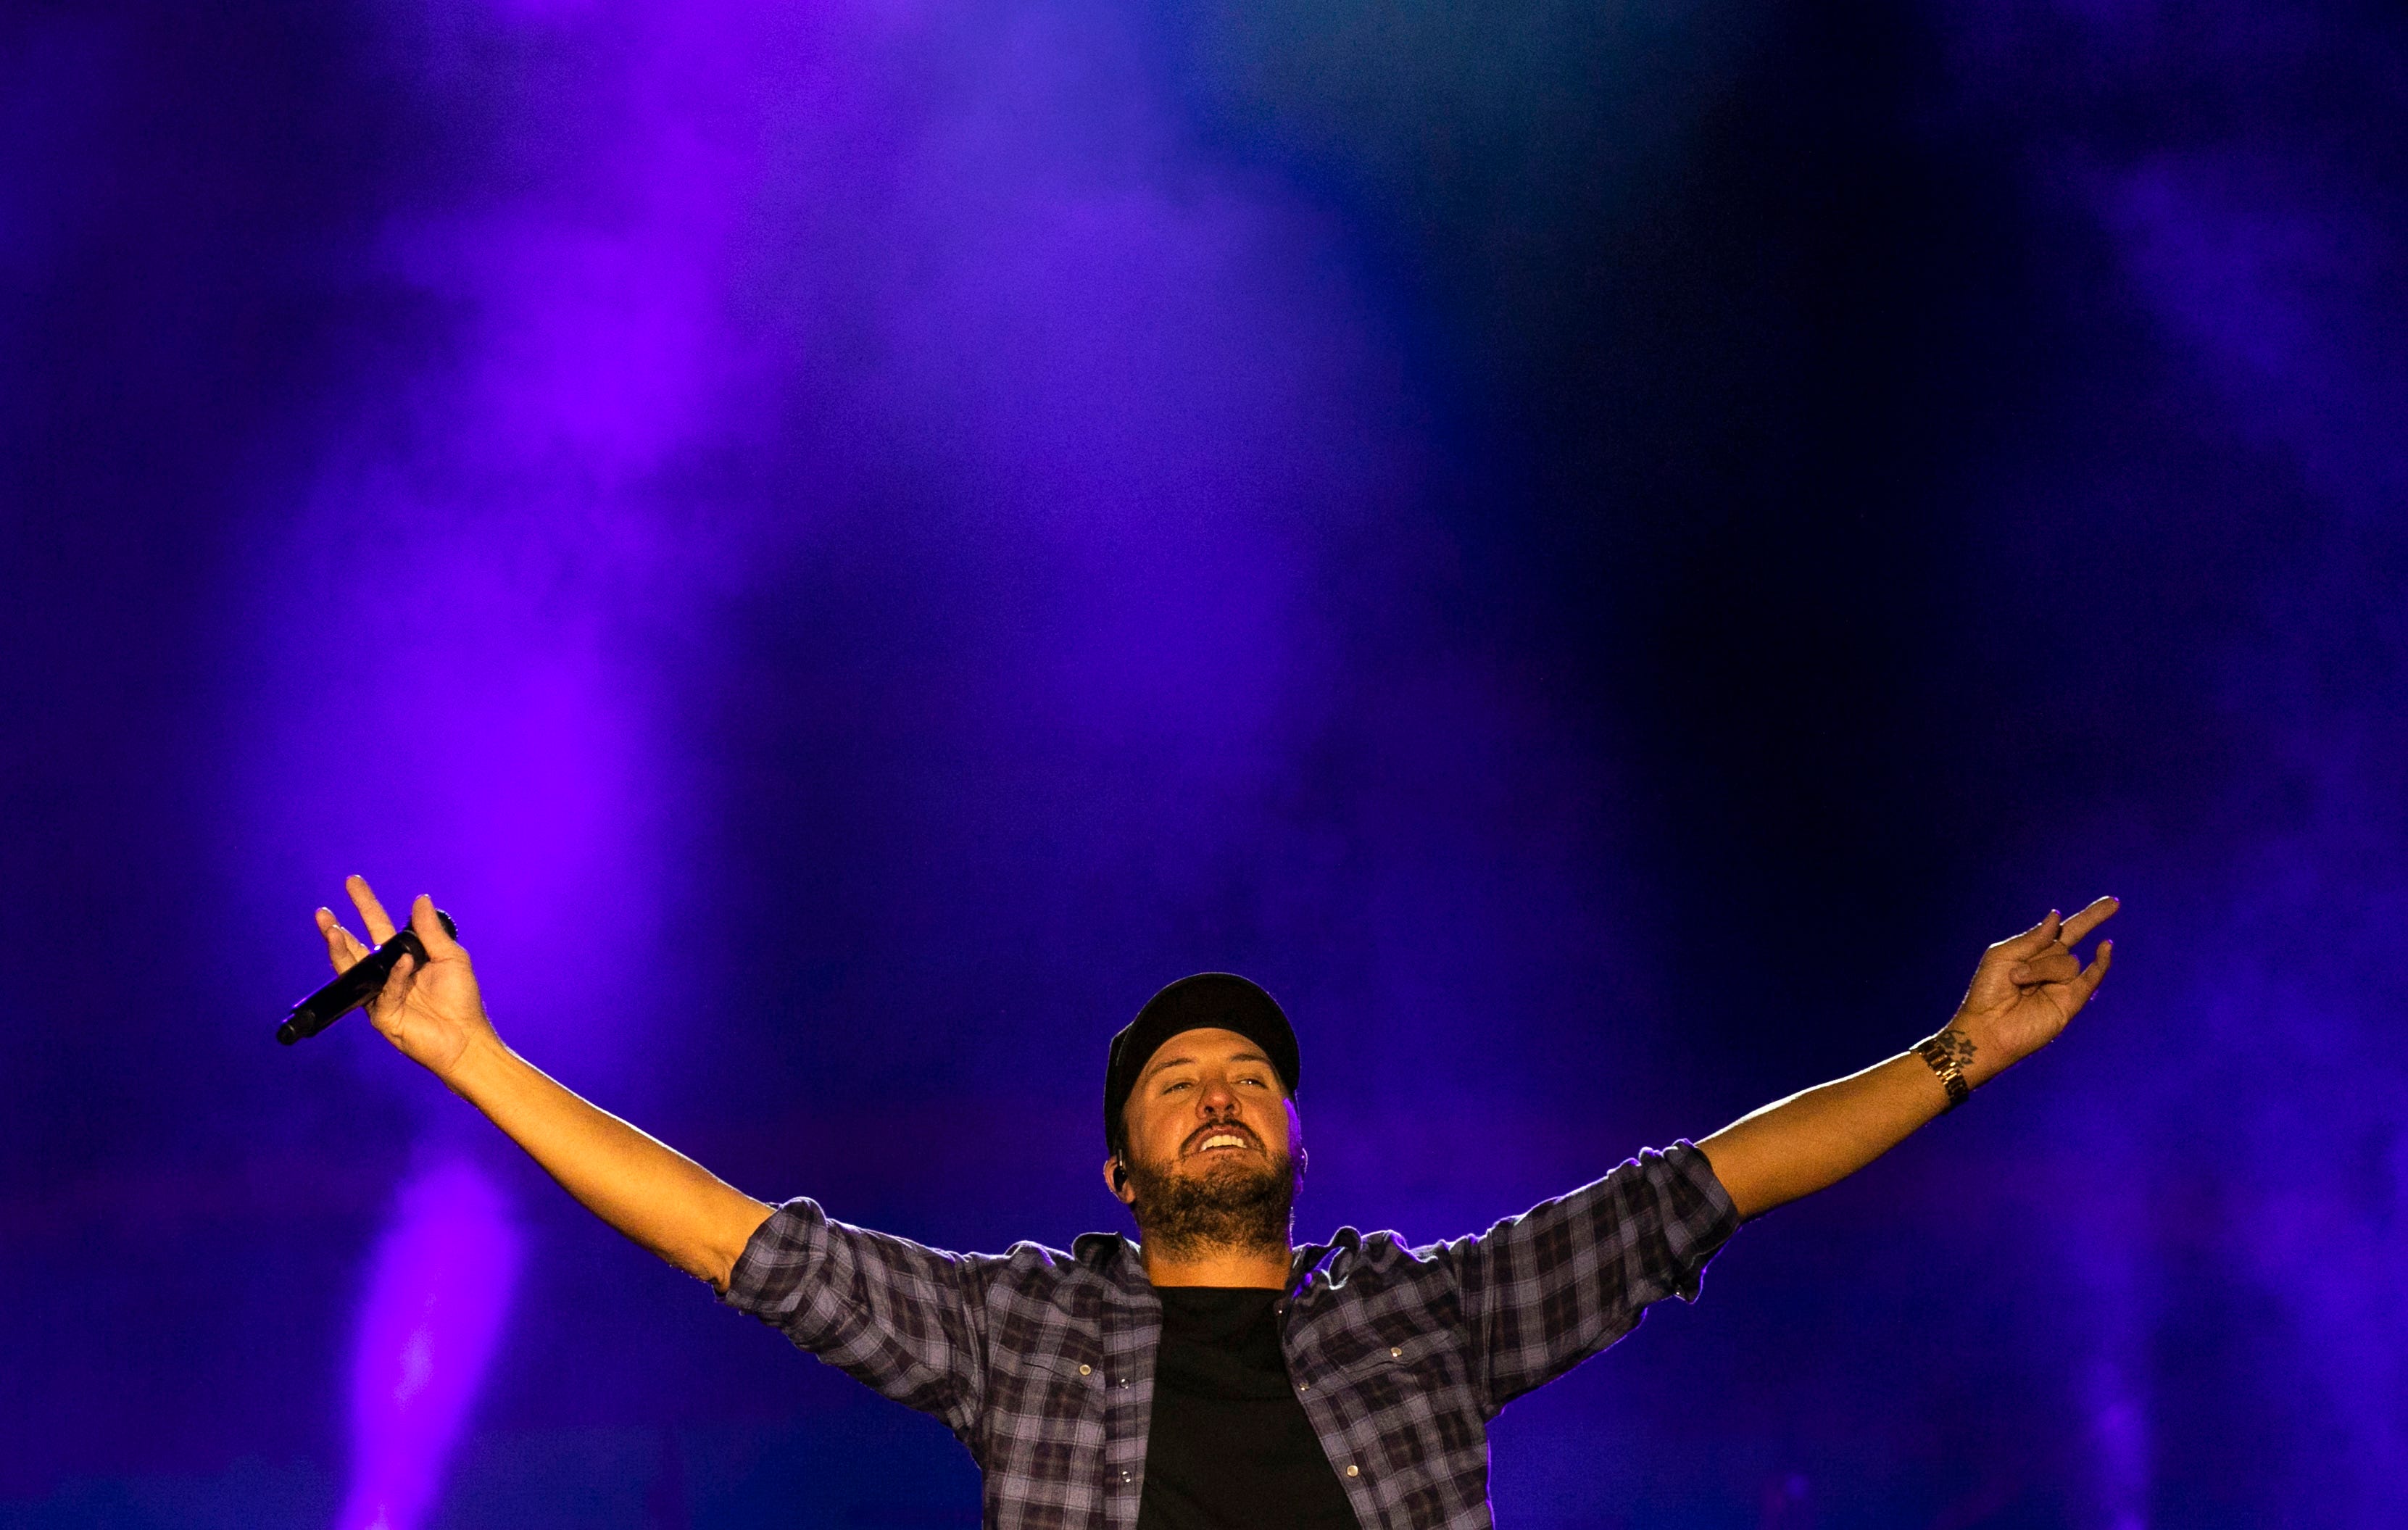 County officials already planning logistics of Luke Bryan's September show in Millersport